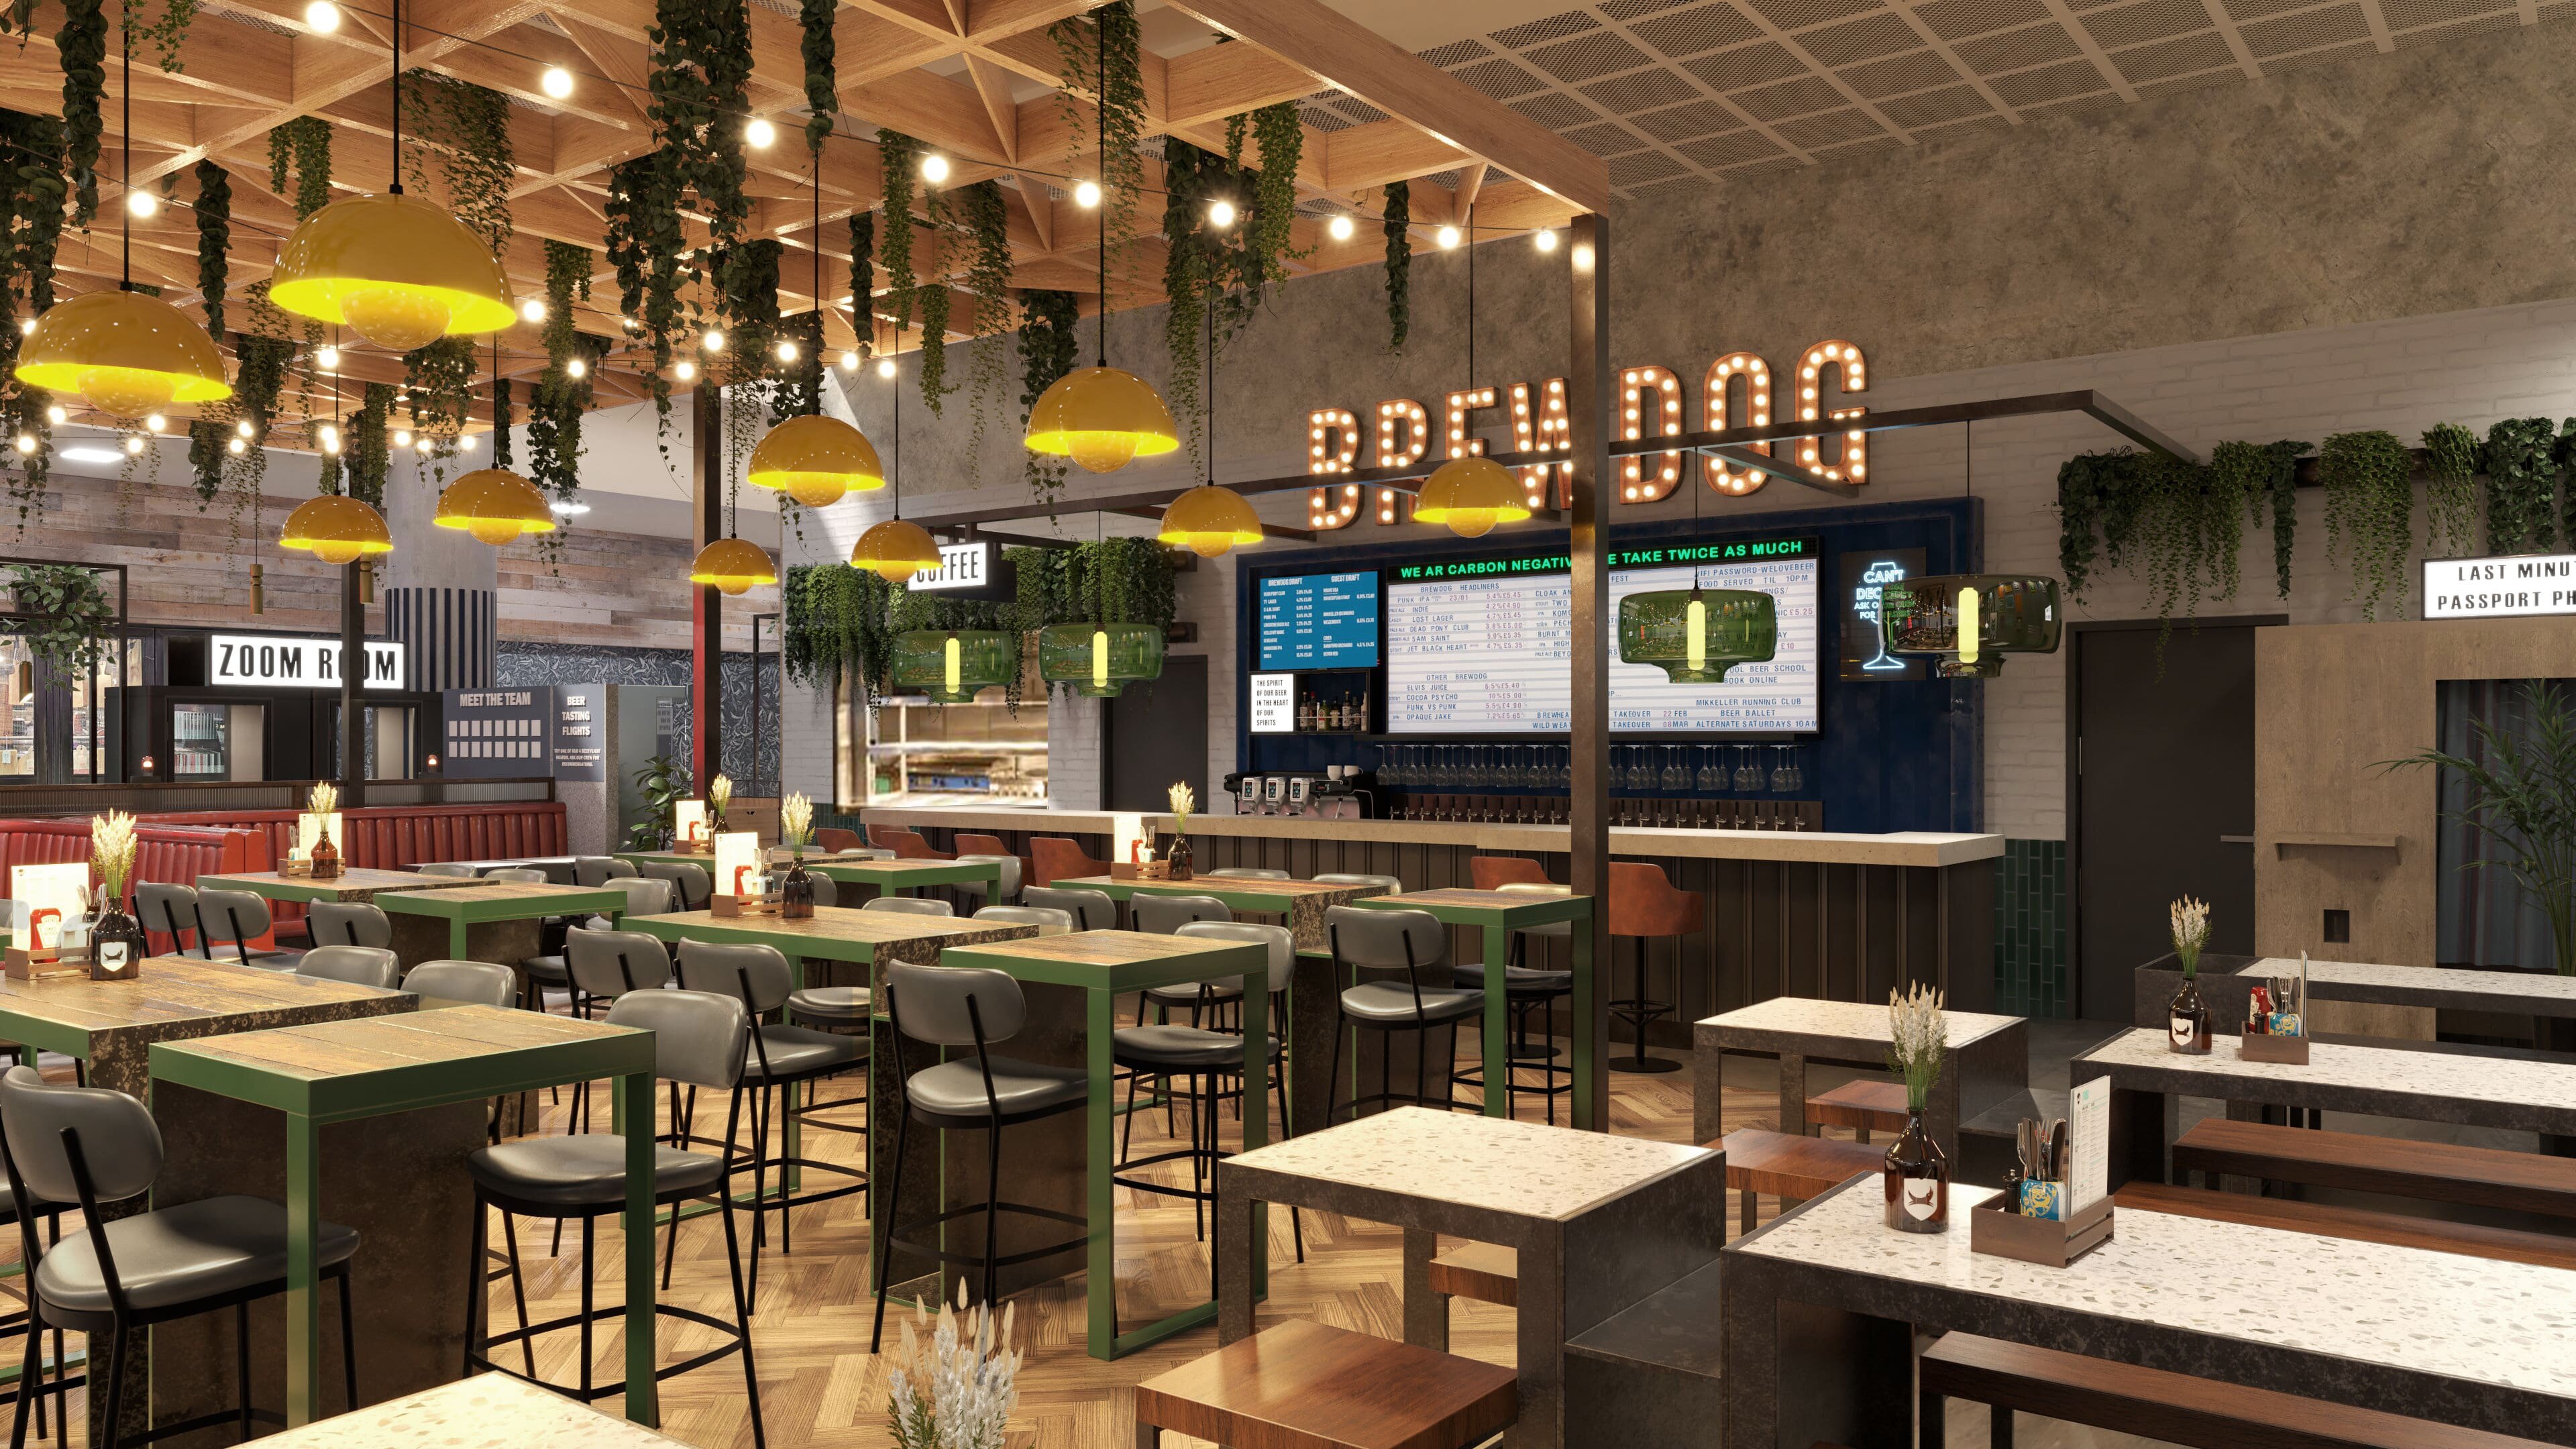 BrewDog partners with SSP to land airport bar at Gatwick